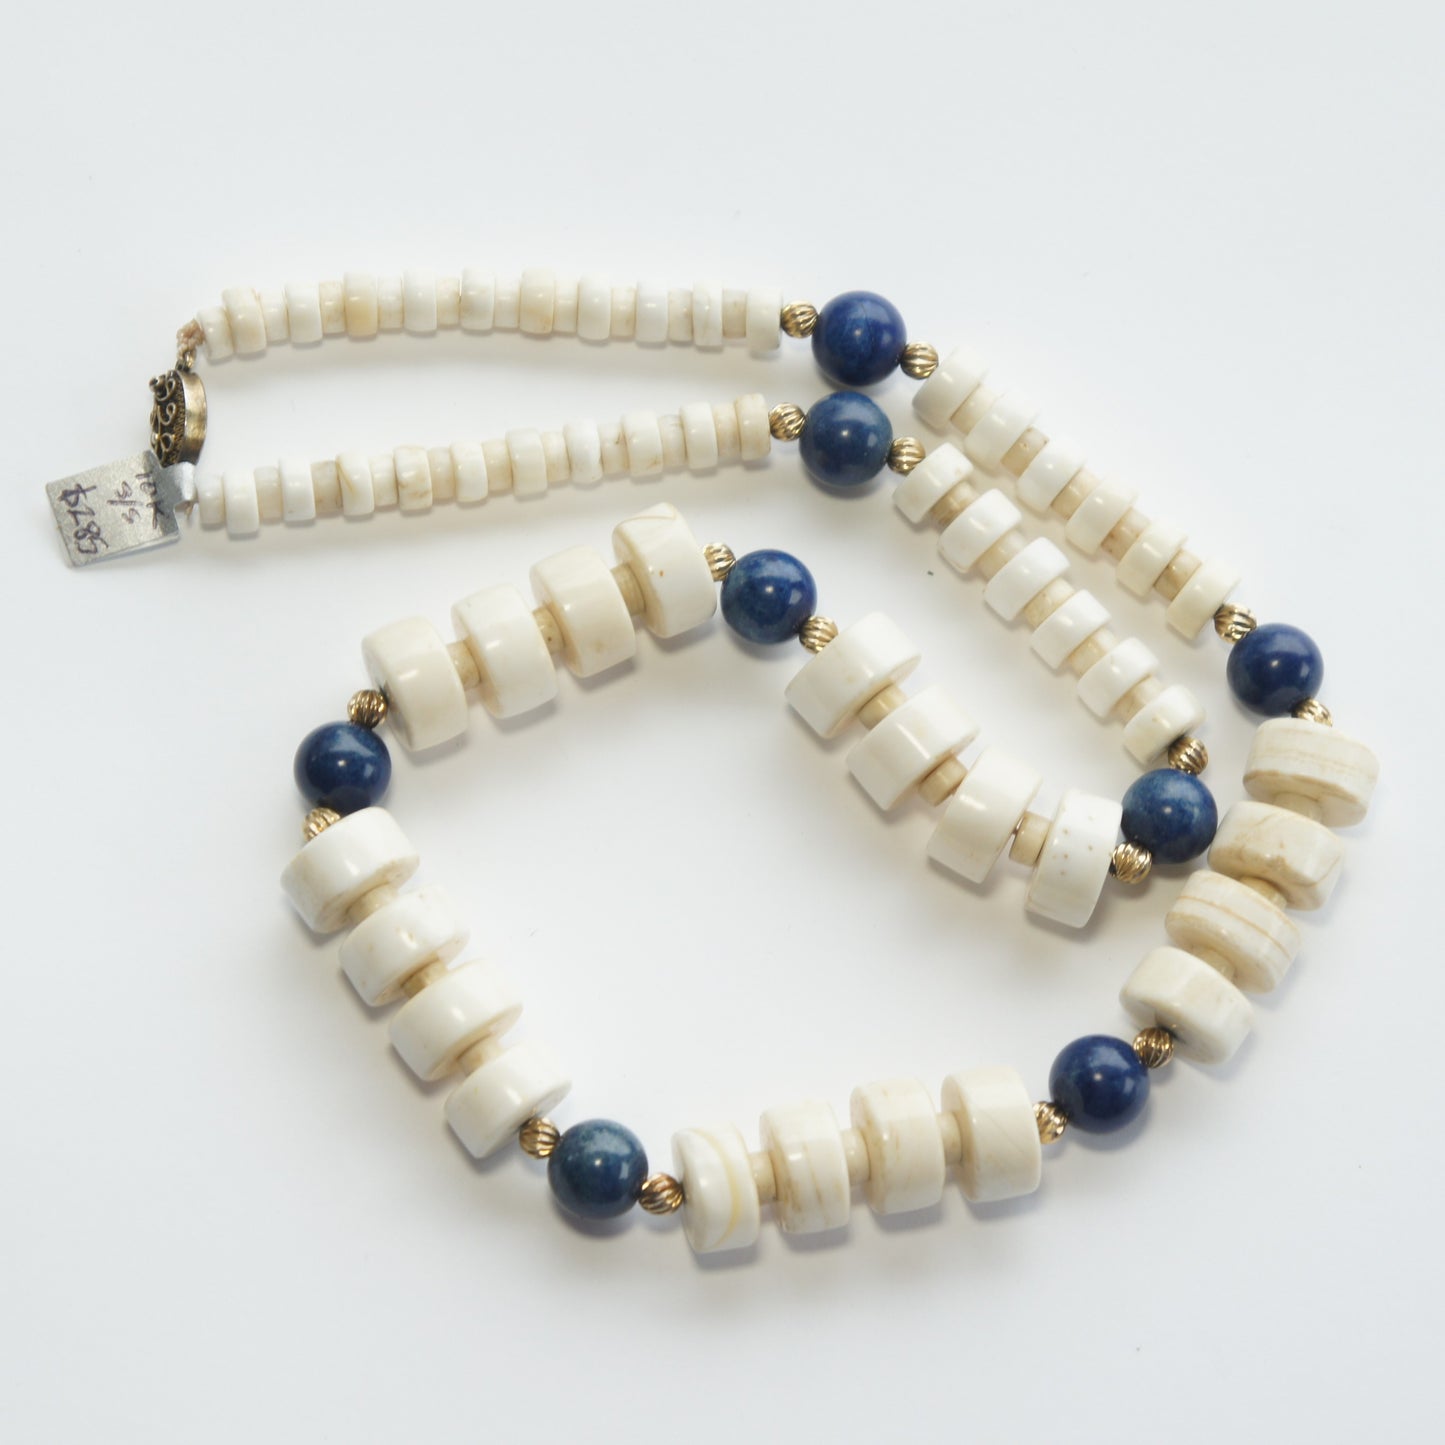 Estate Chinese Lapis Lazuli 10k Gold Graduated Carved Bead Necklace c1950-80